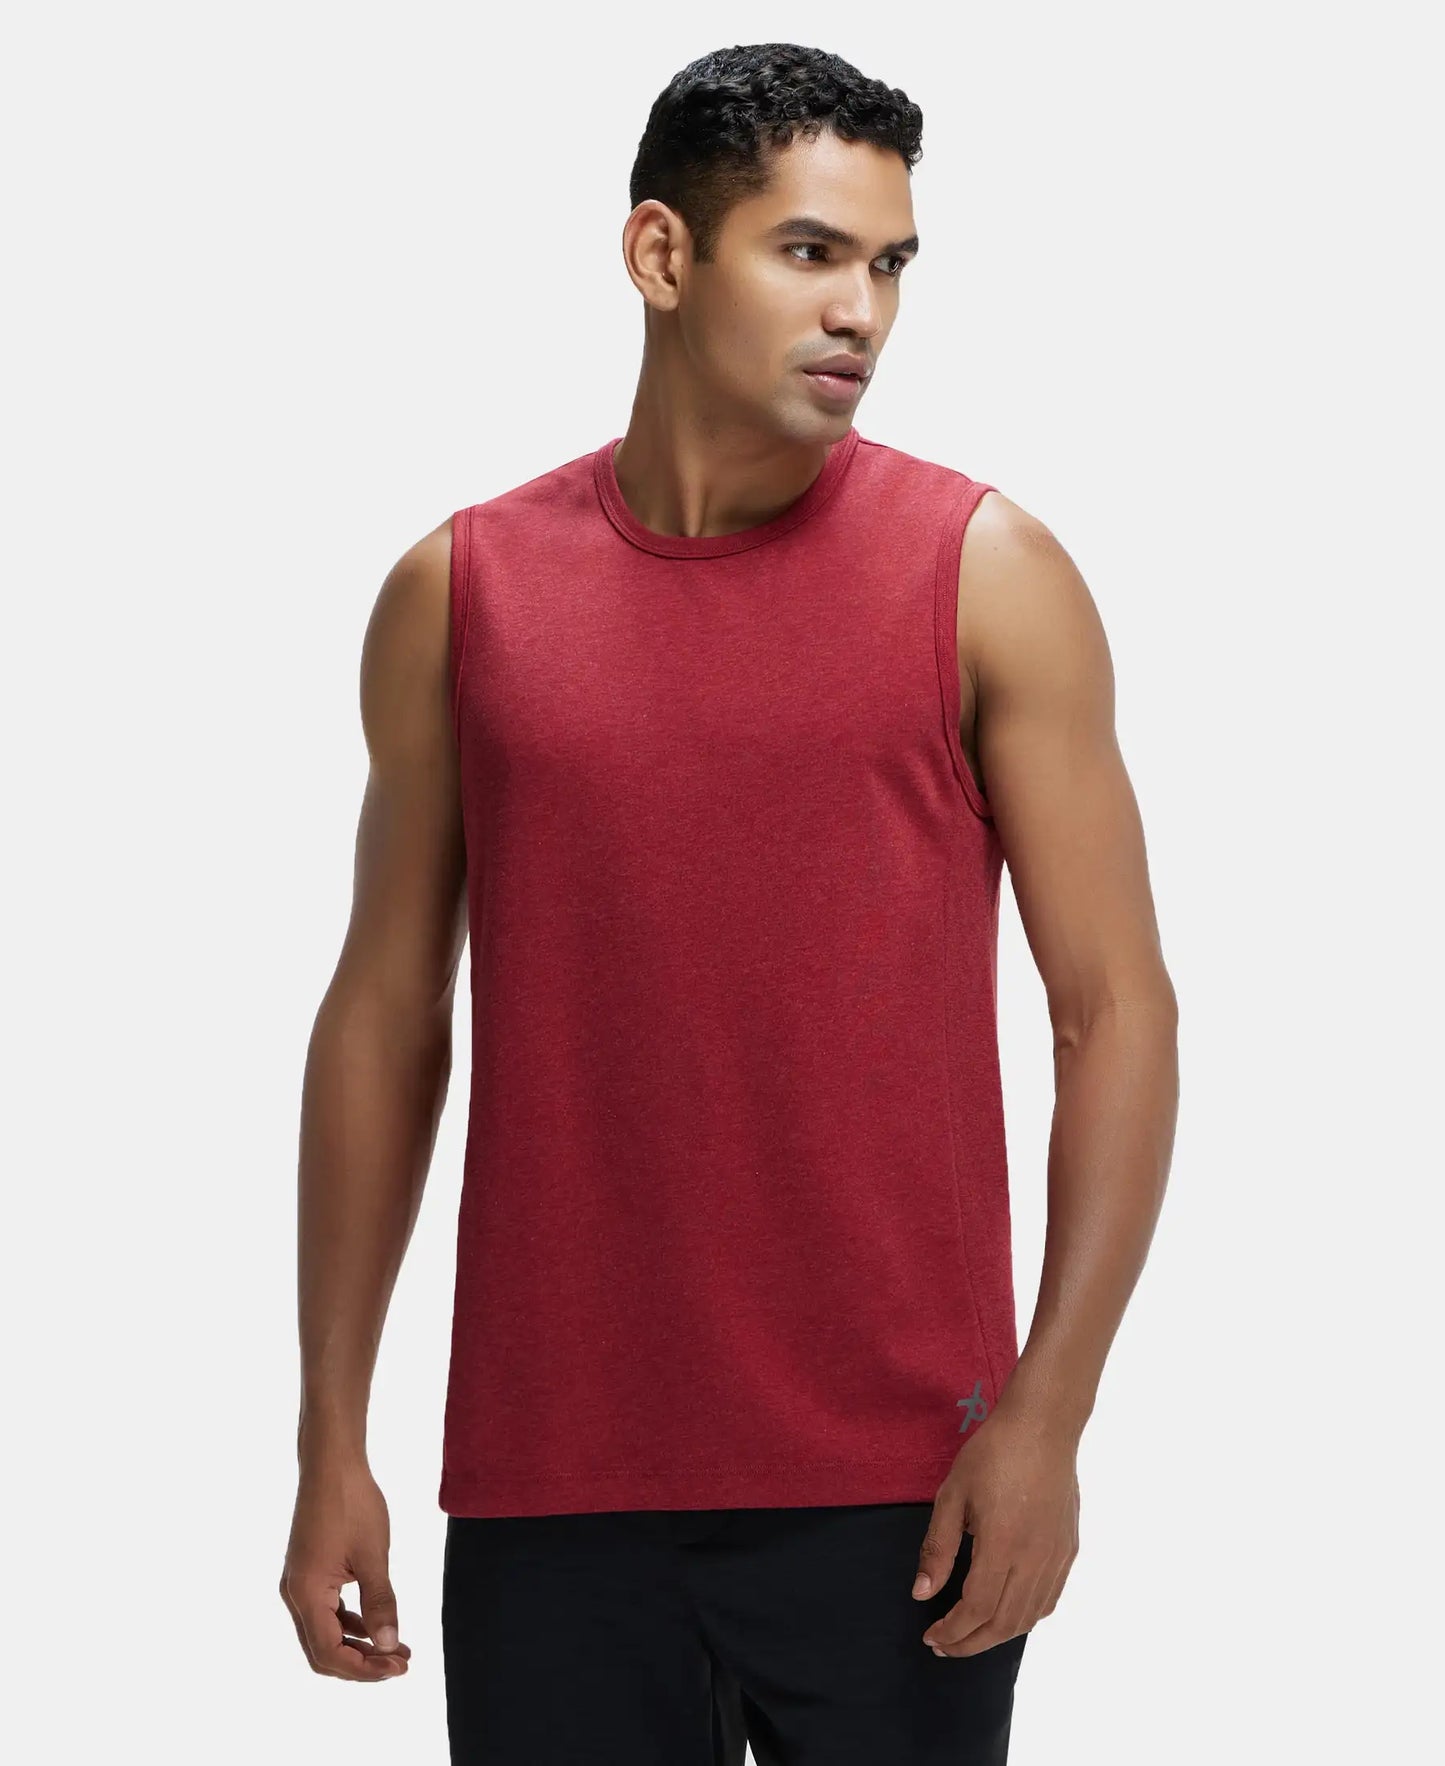 Super Combed Cotton Blend Round Neck Muscle Tee with Breathable Mesh - Brick Red Melange-1